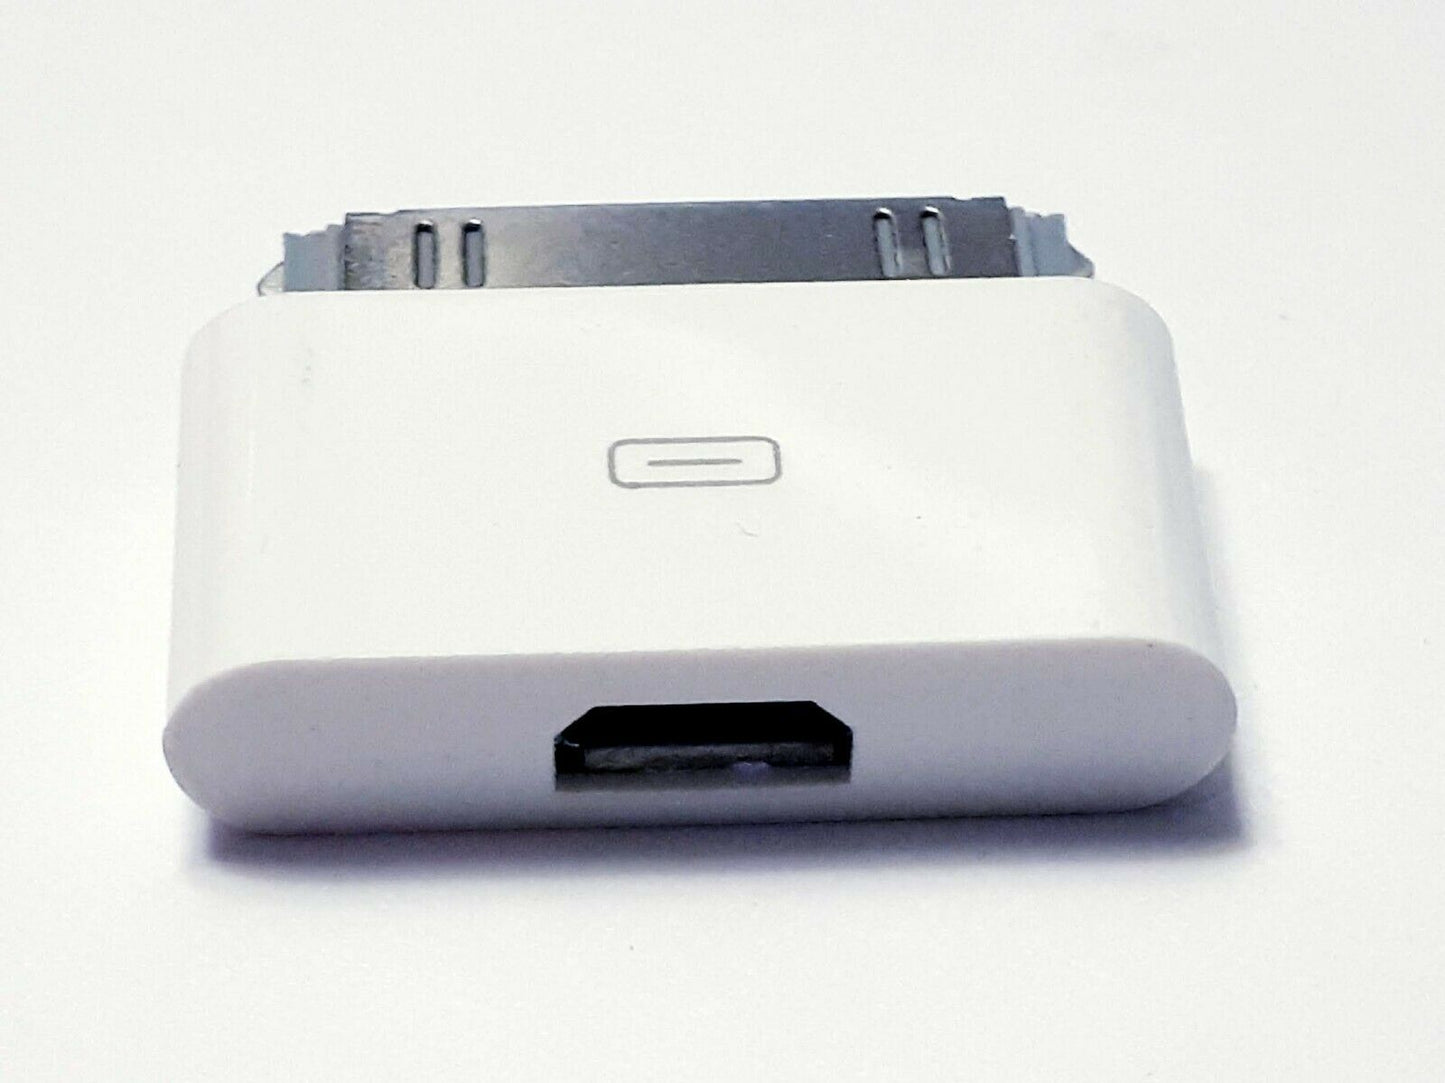 Micro USB Female to 30pin Male Adapter Dock for iPhone 4 4S 3G 3GS iPod iPad